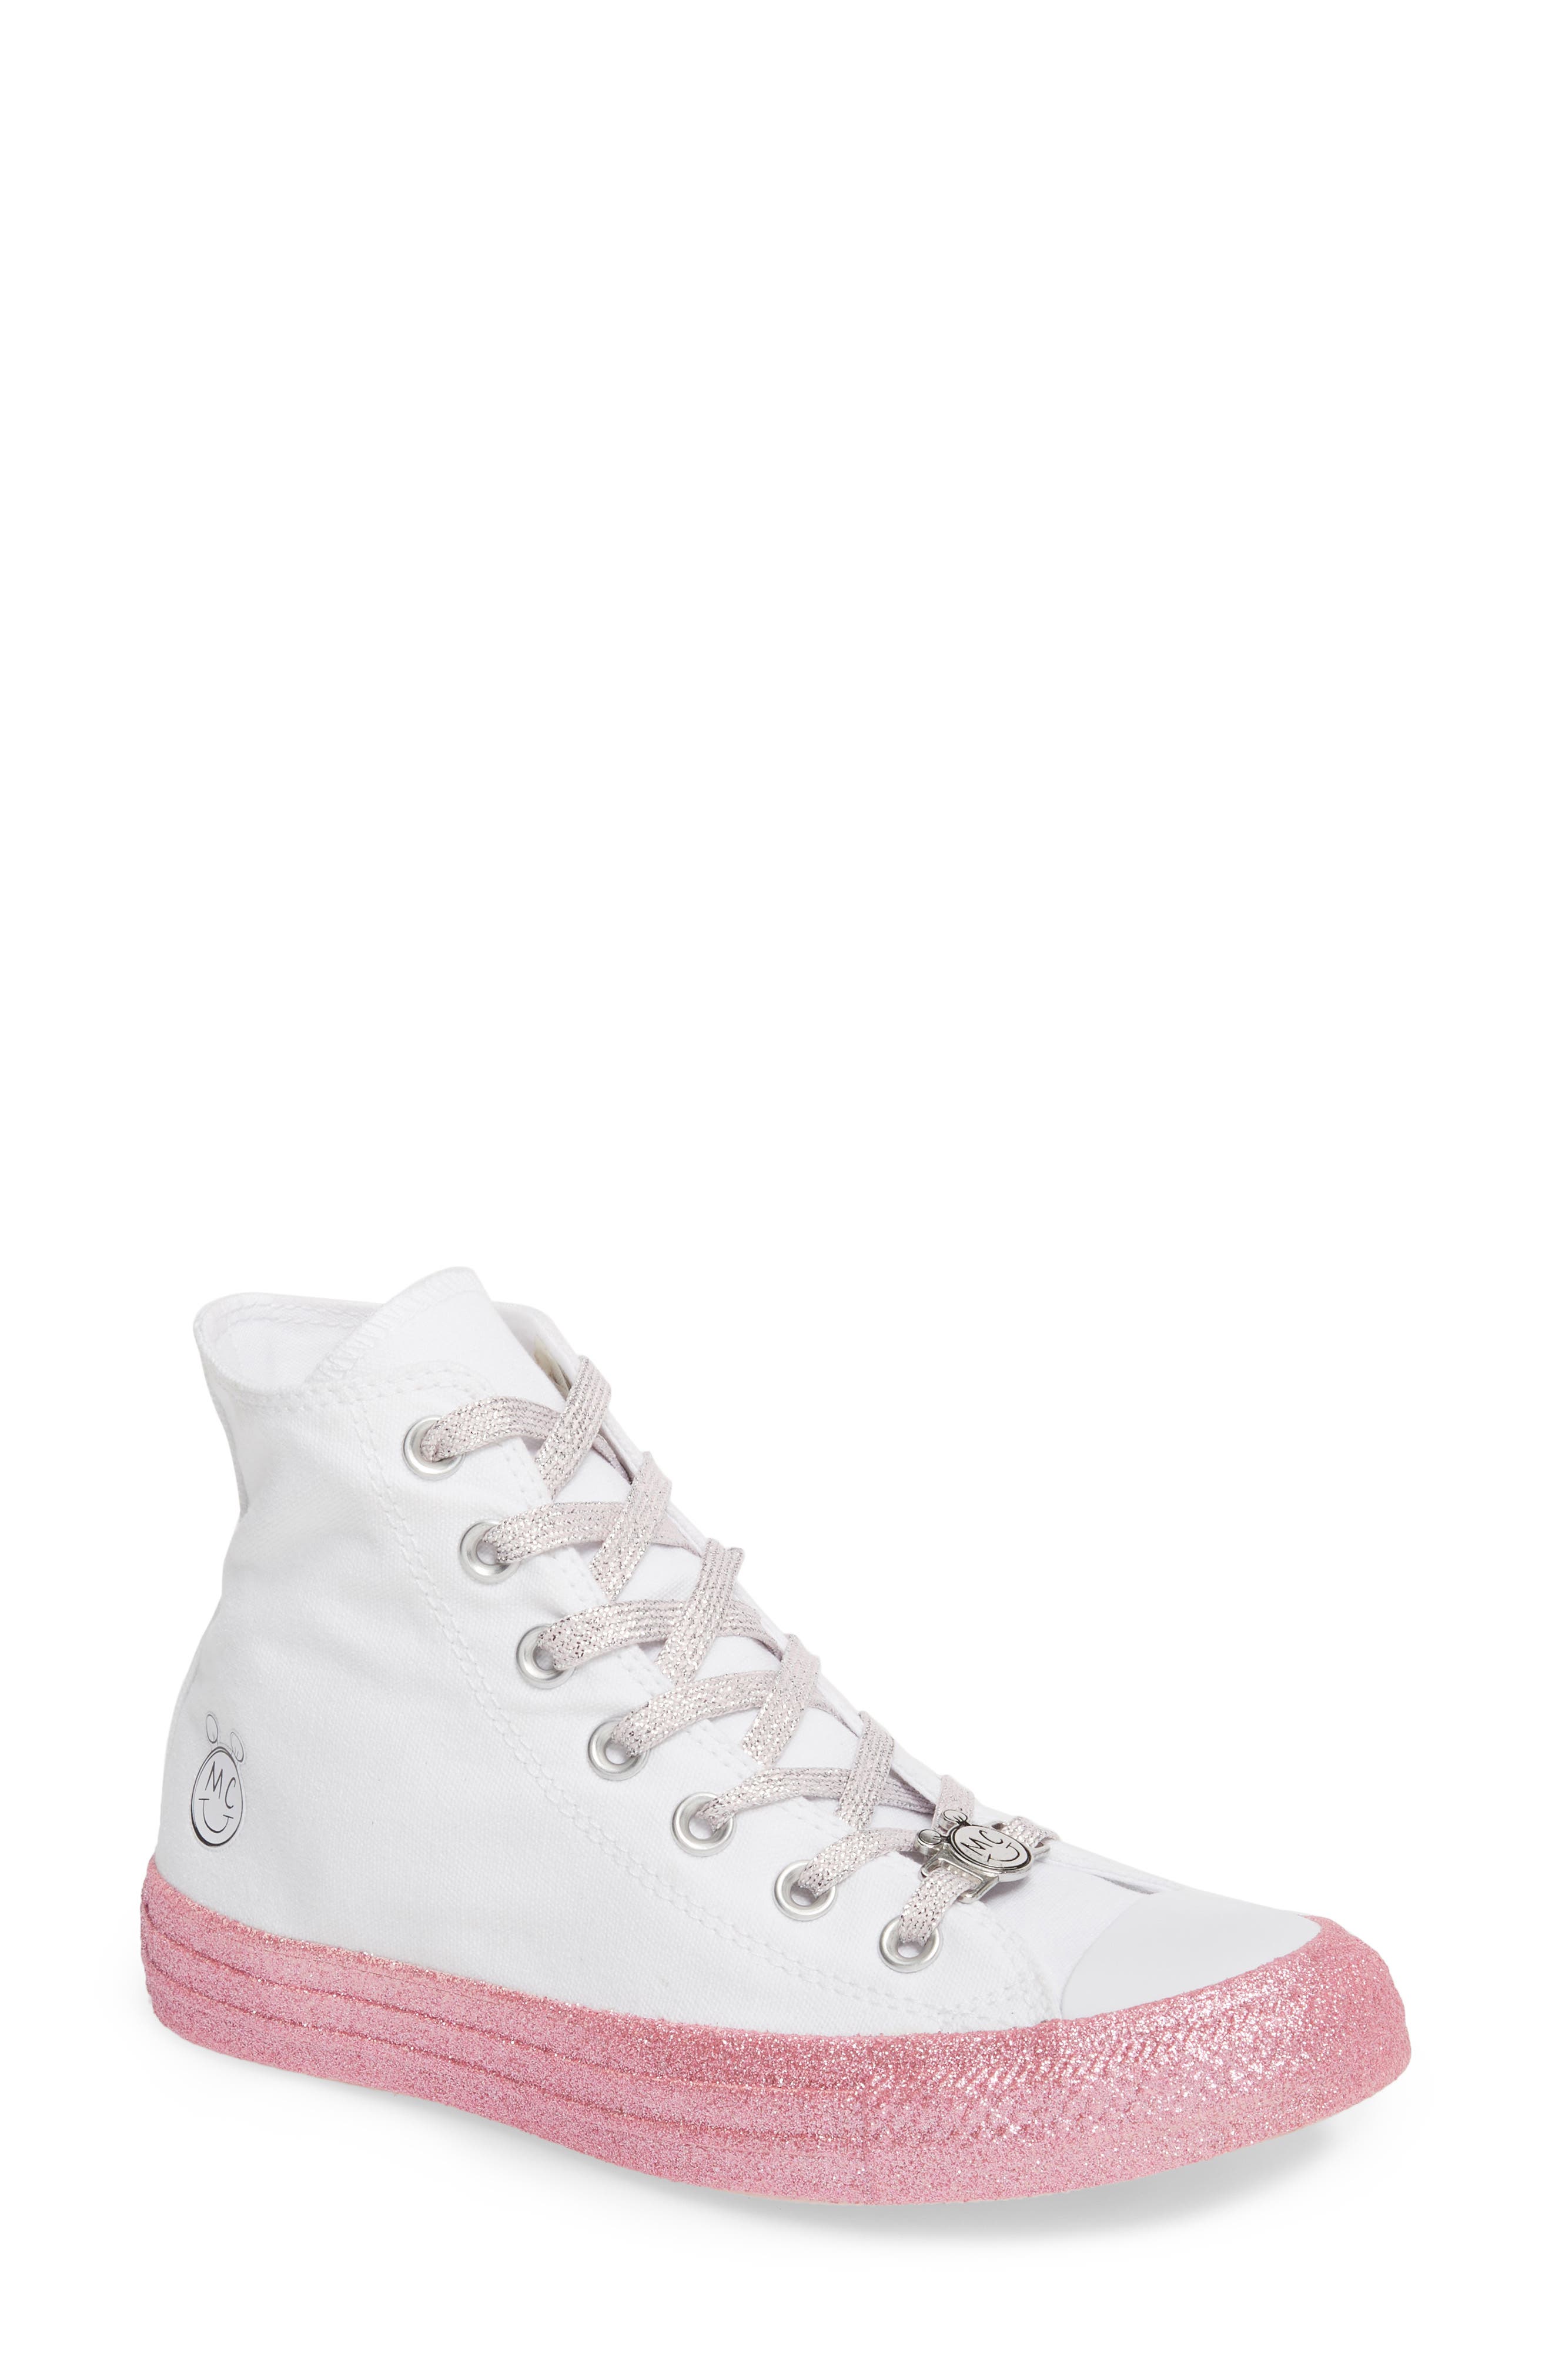 converse by miley